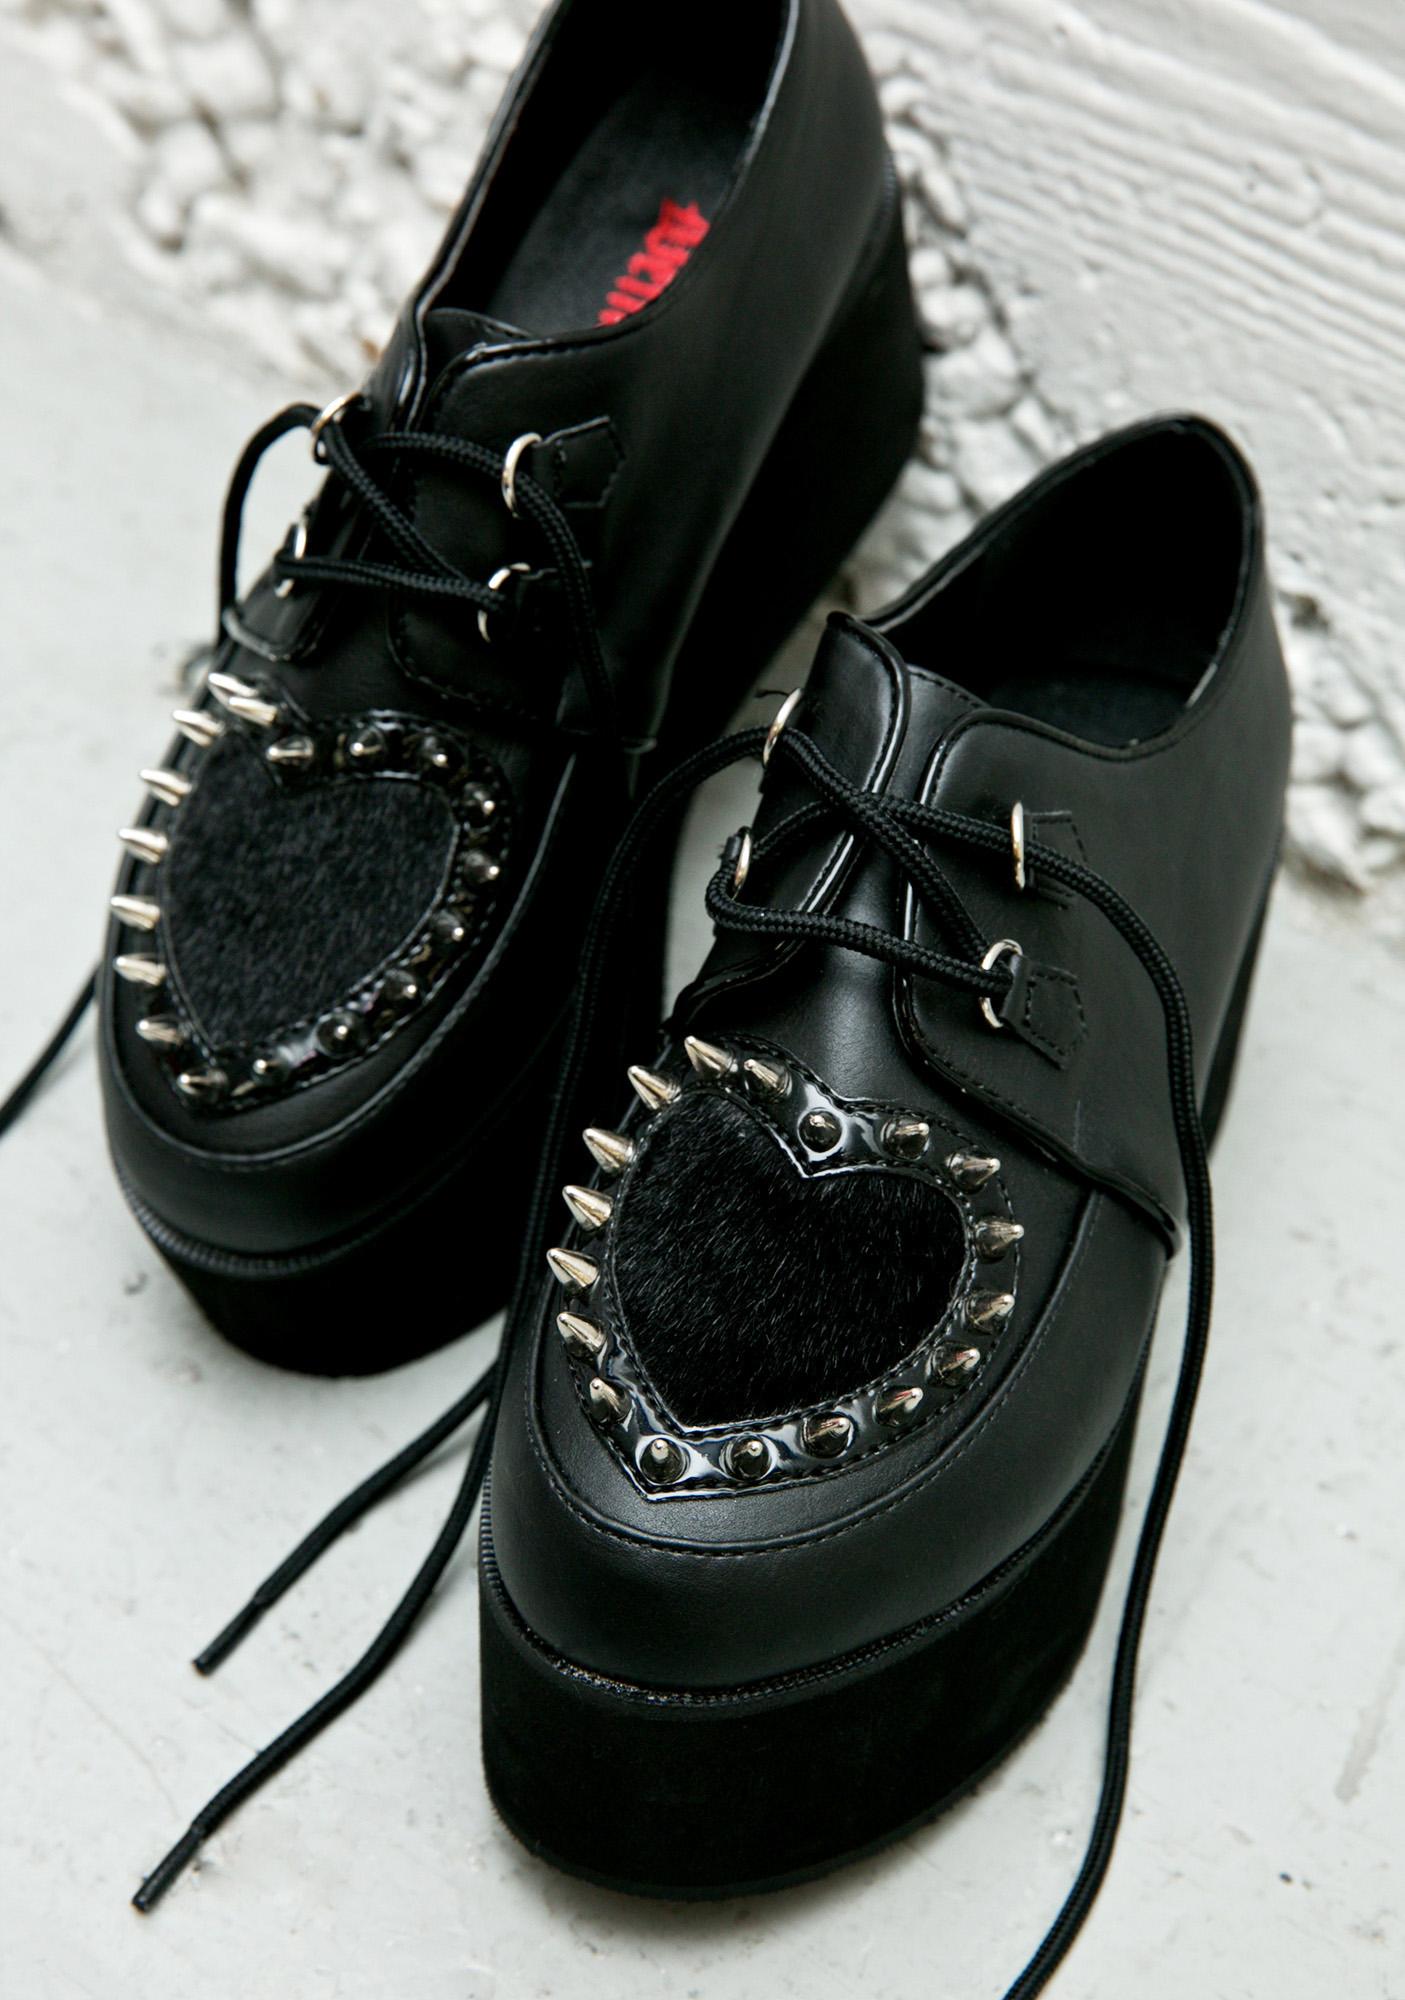 spiked creepers